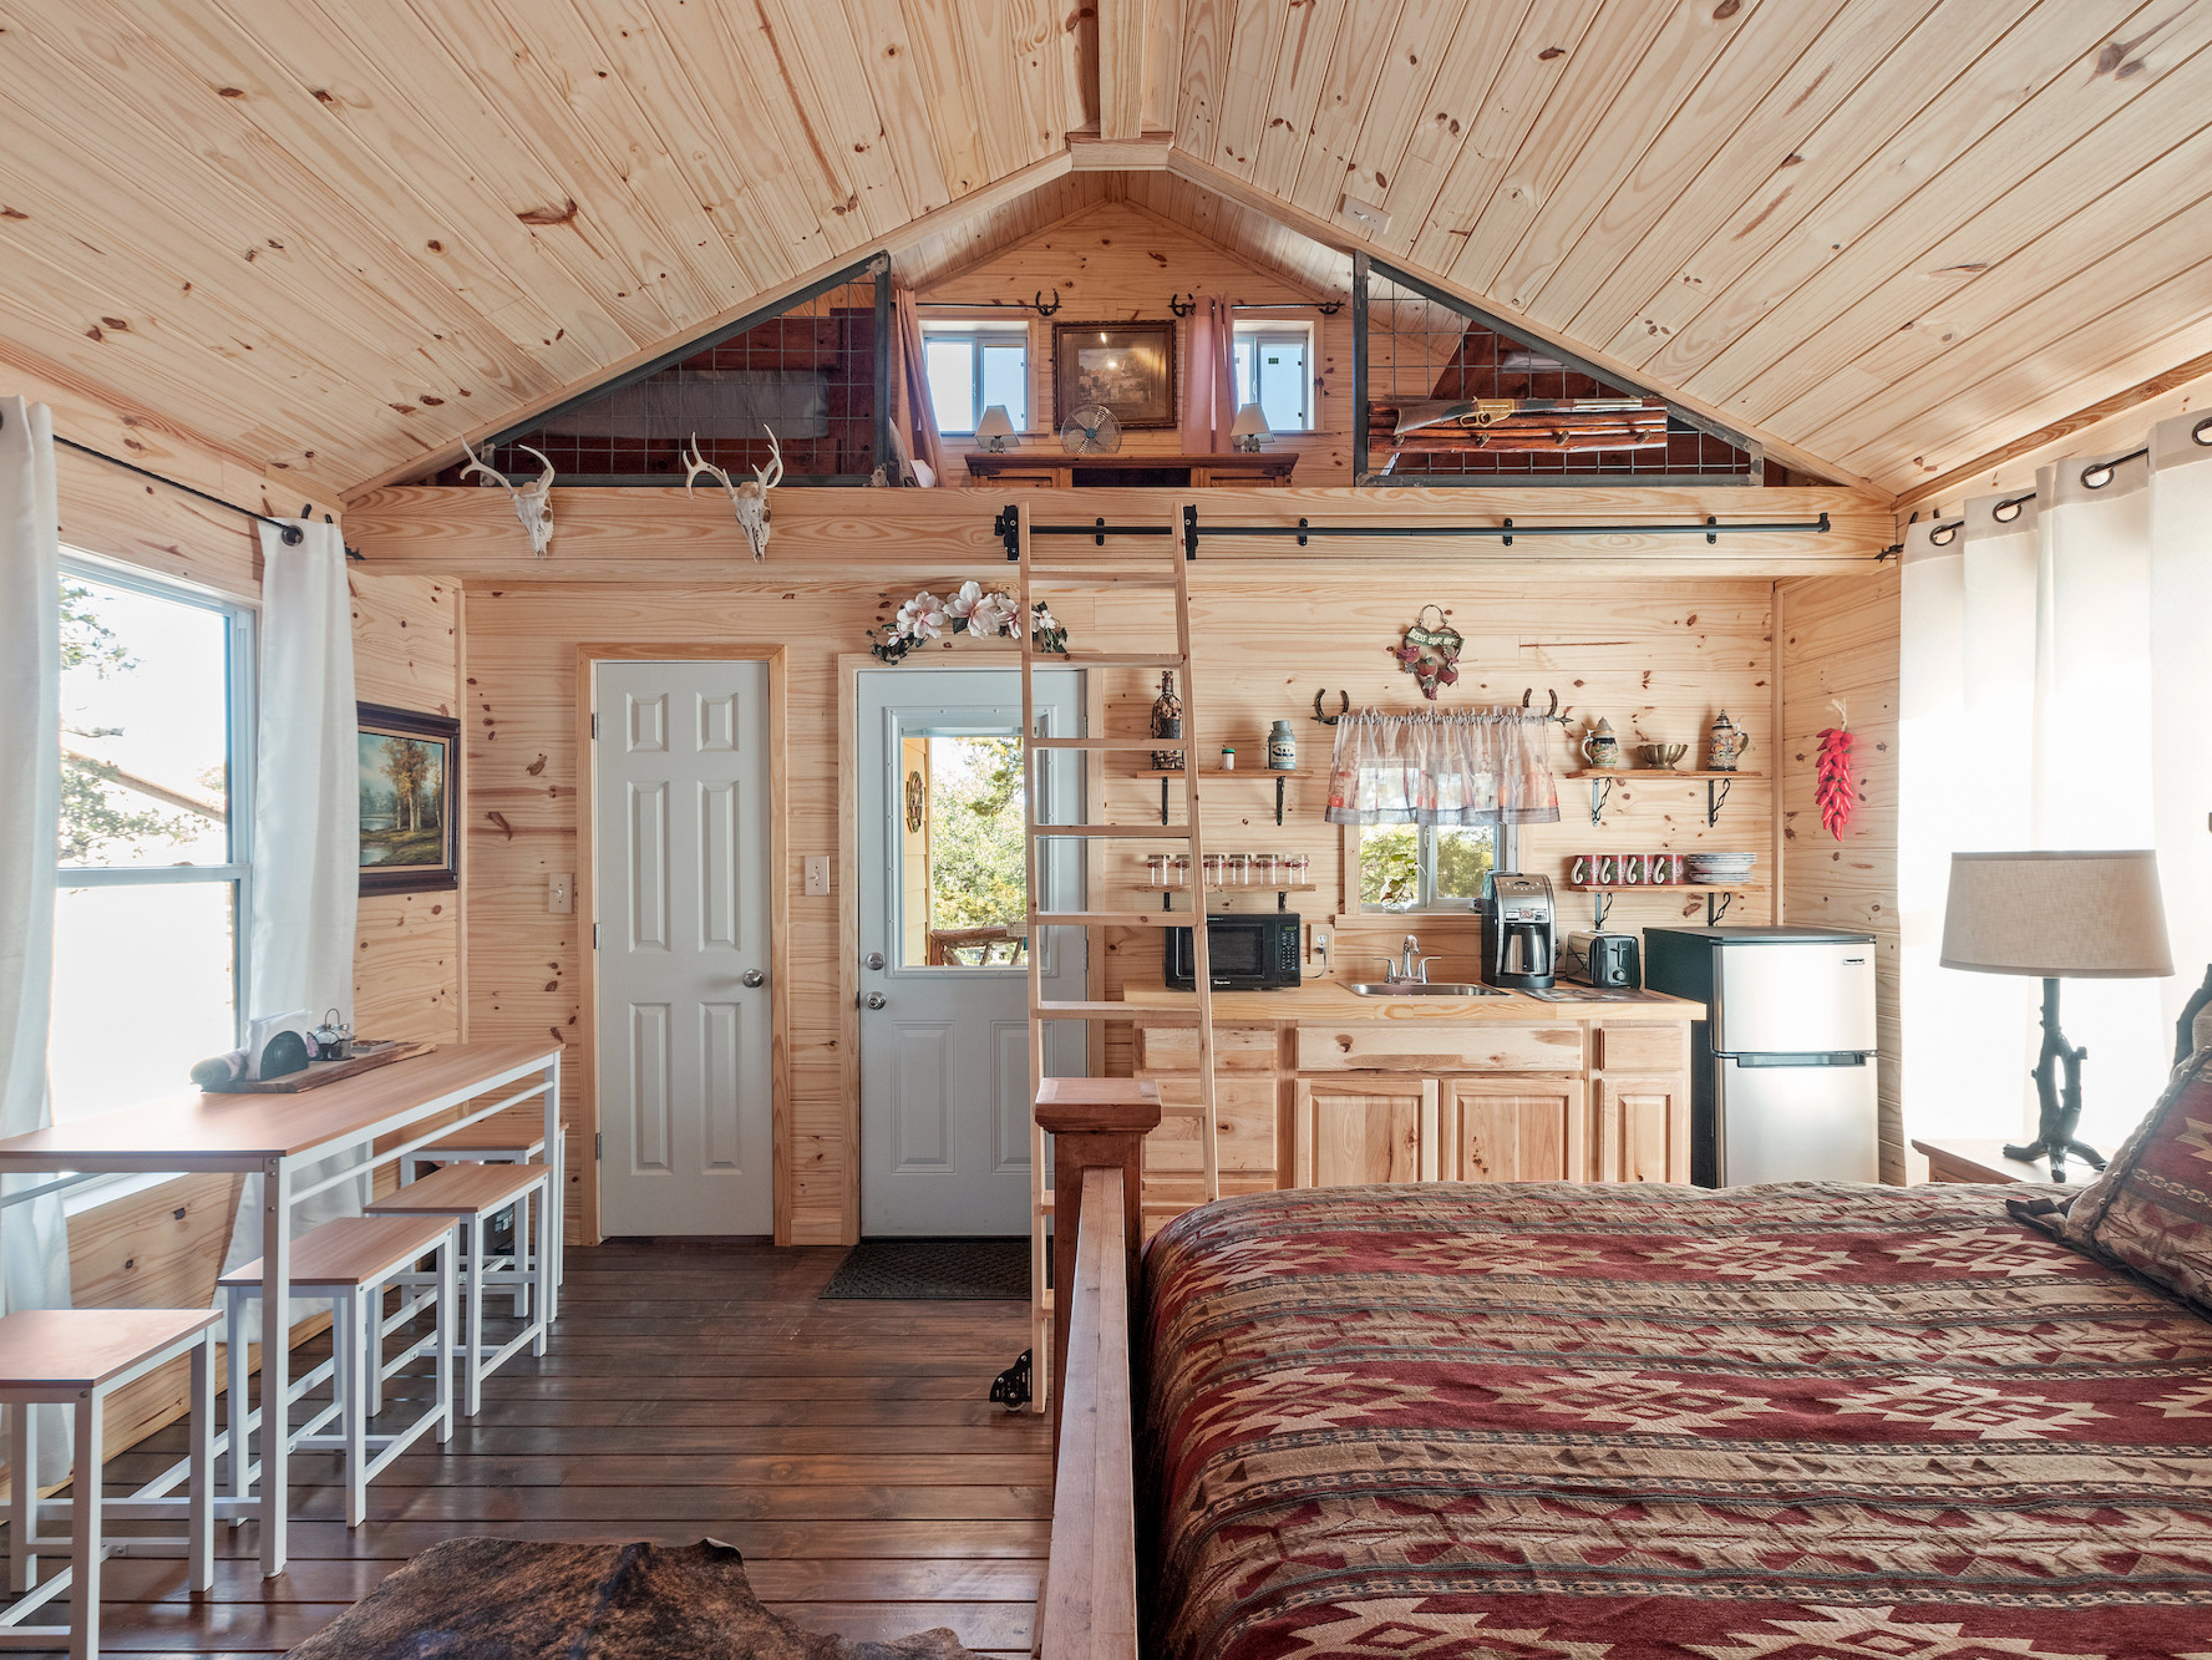 Blanco 2 tiny home vacation rentals in Texas